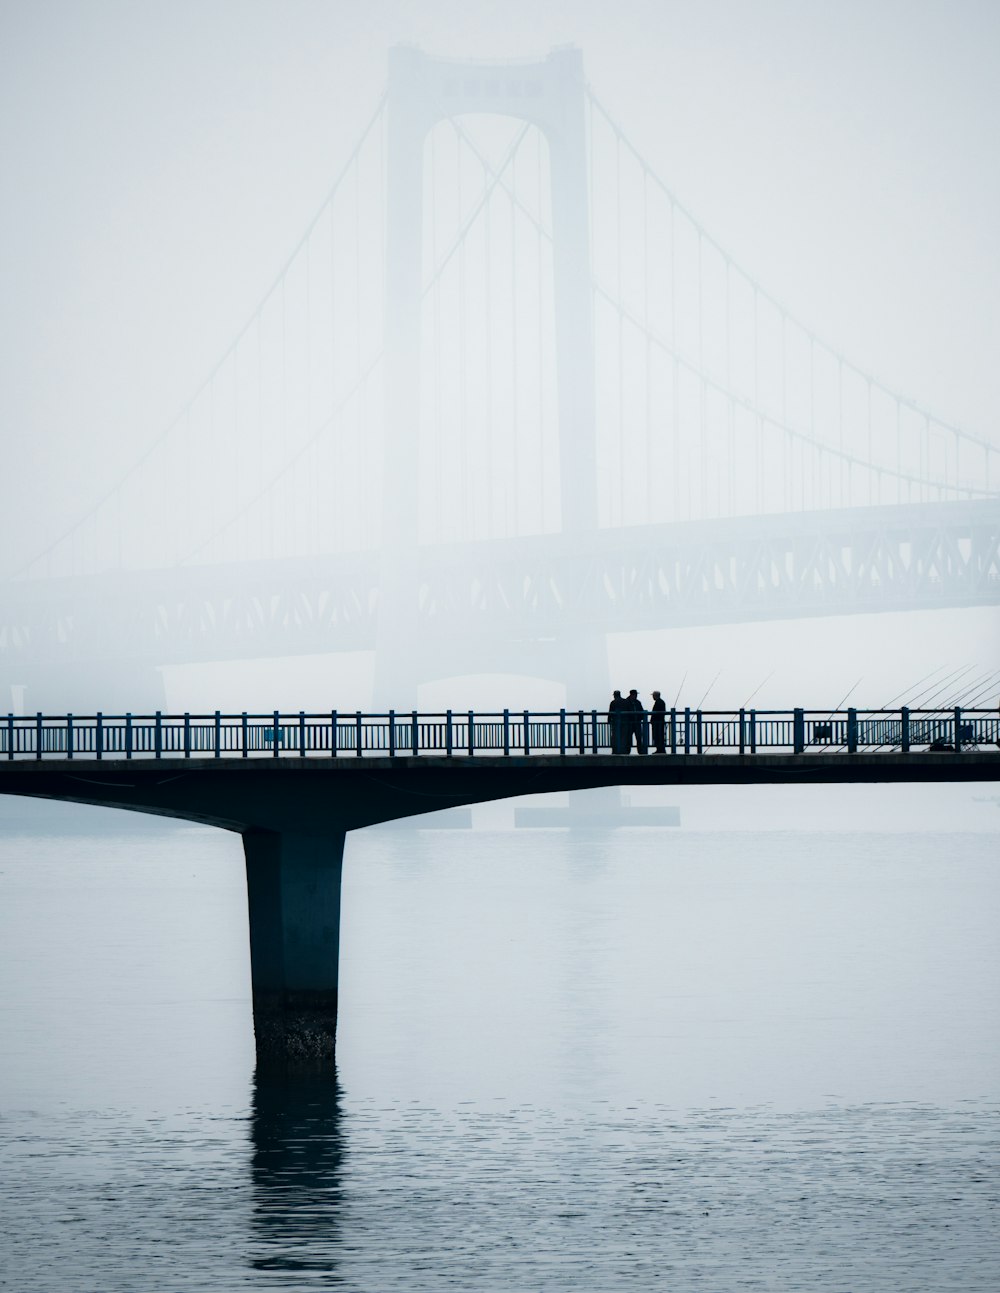 two people standing on a bridge over a body of water